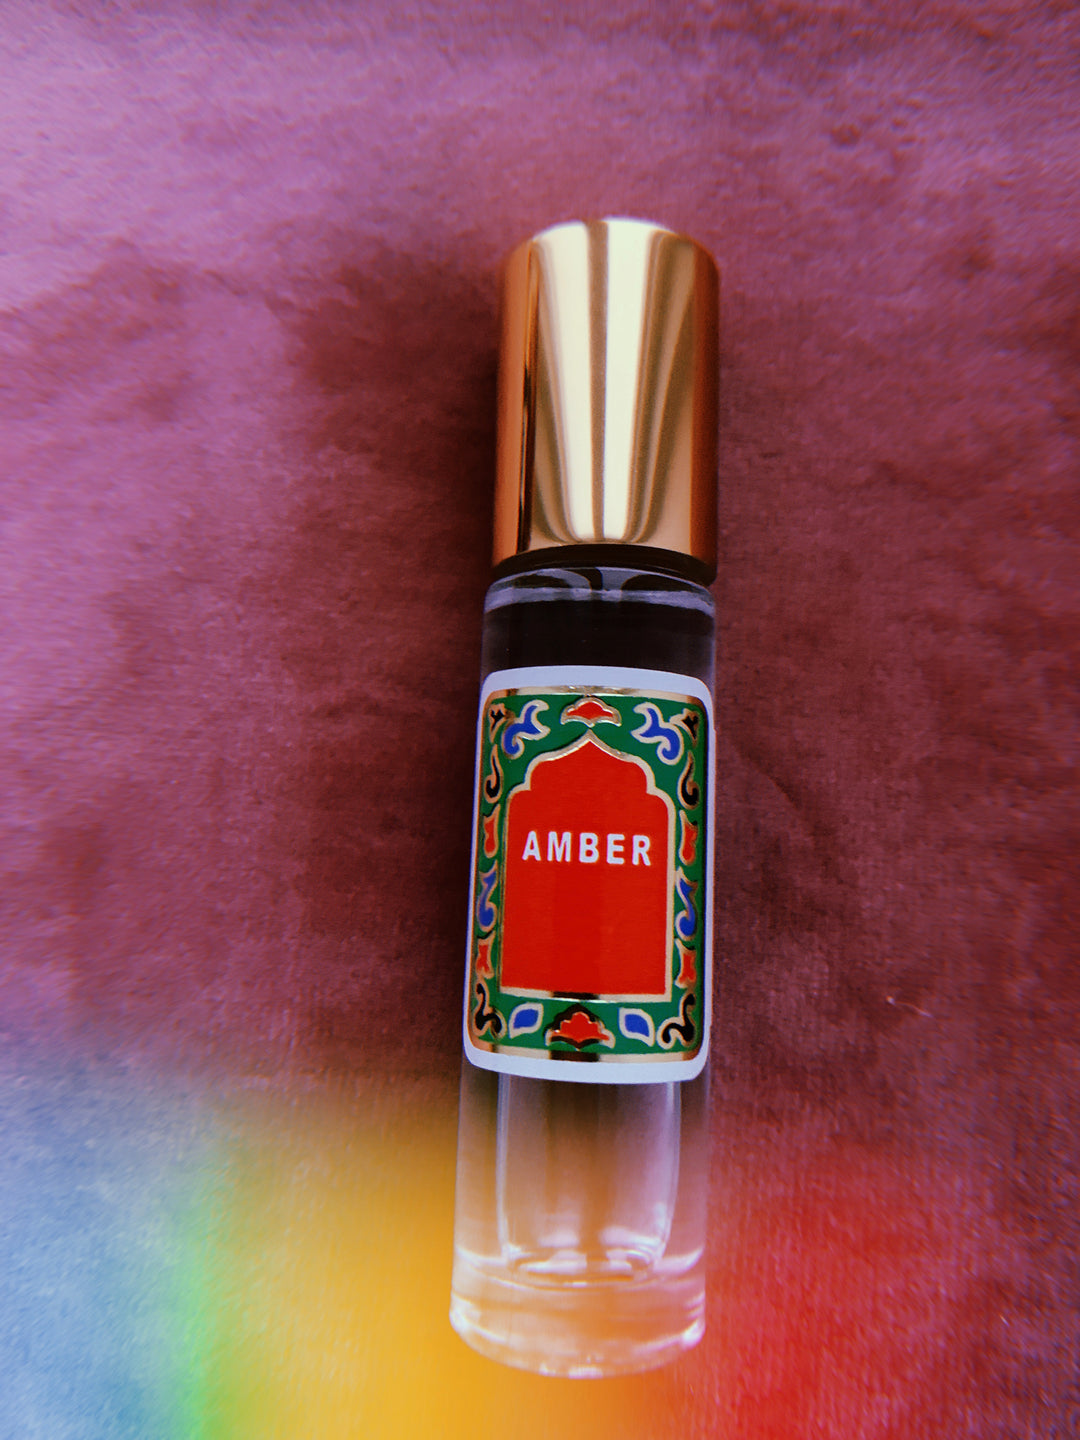 Amber Perfume Oil at Whole Foods Market